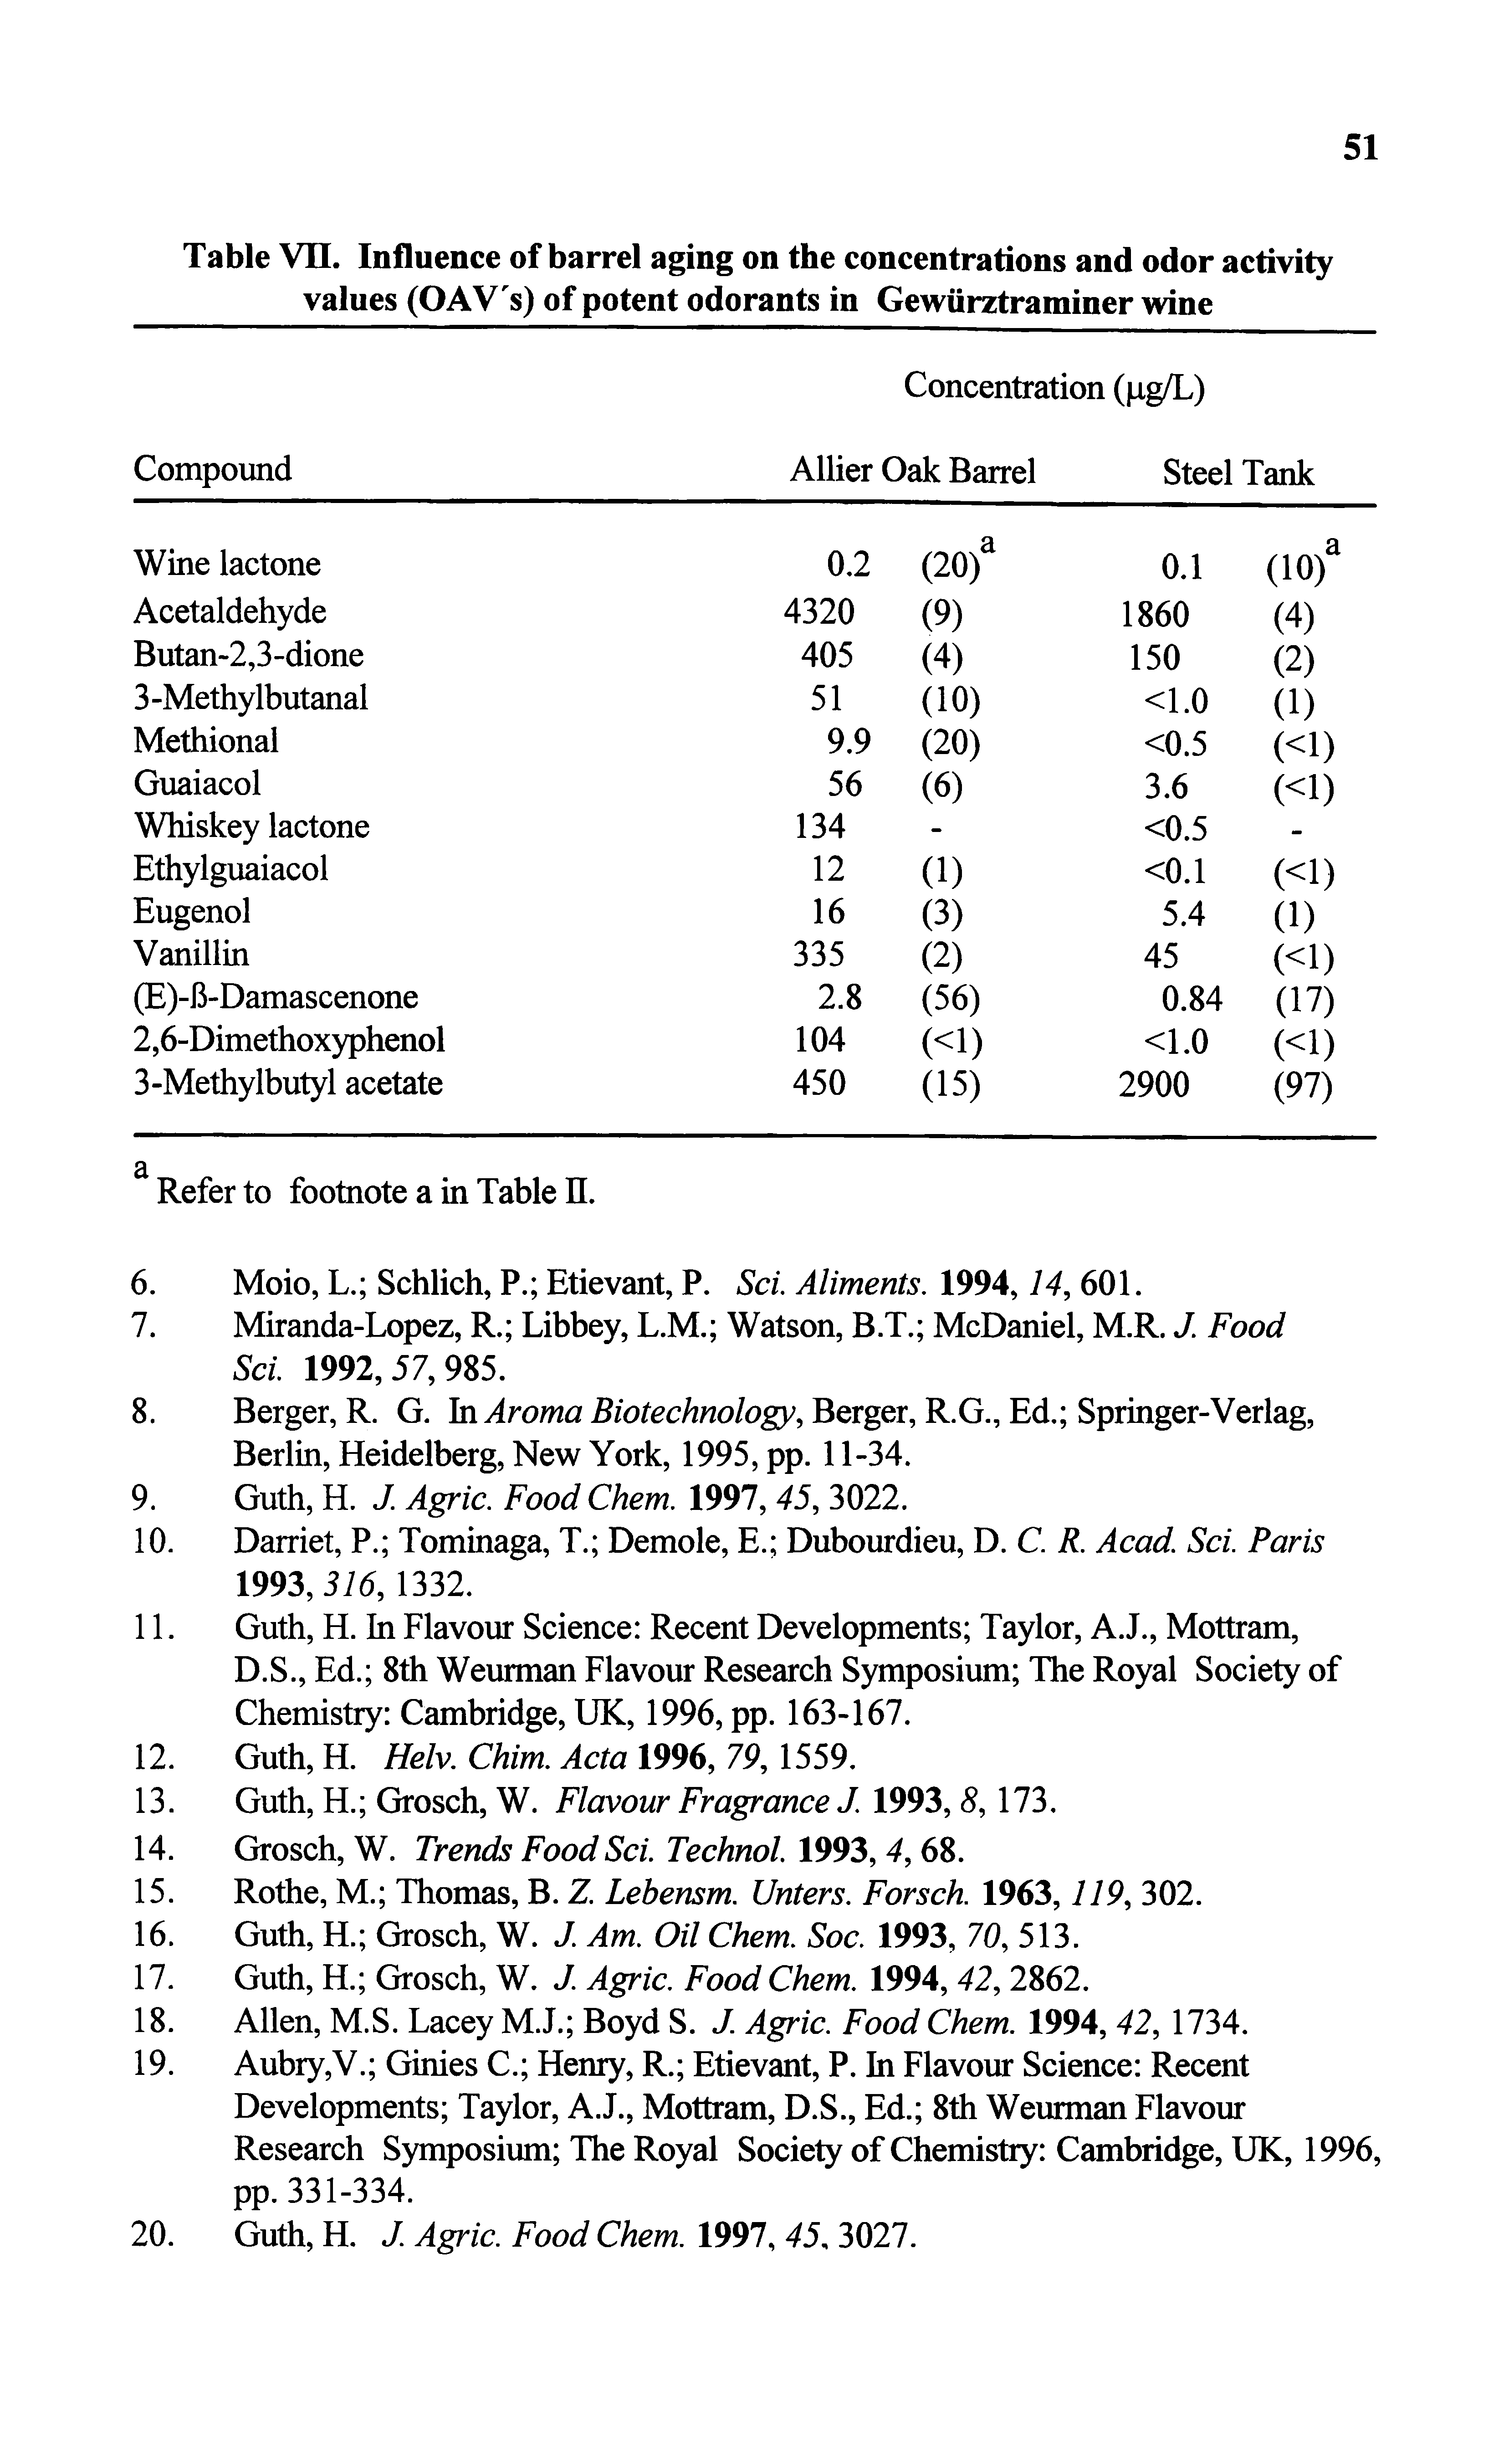 Table VII. Influence of barrel aging on the concentrations and odor activity values (OAV"s) of potent odorants in Gewiirztraminer wine...